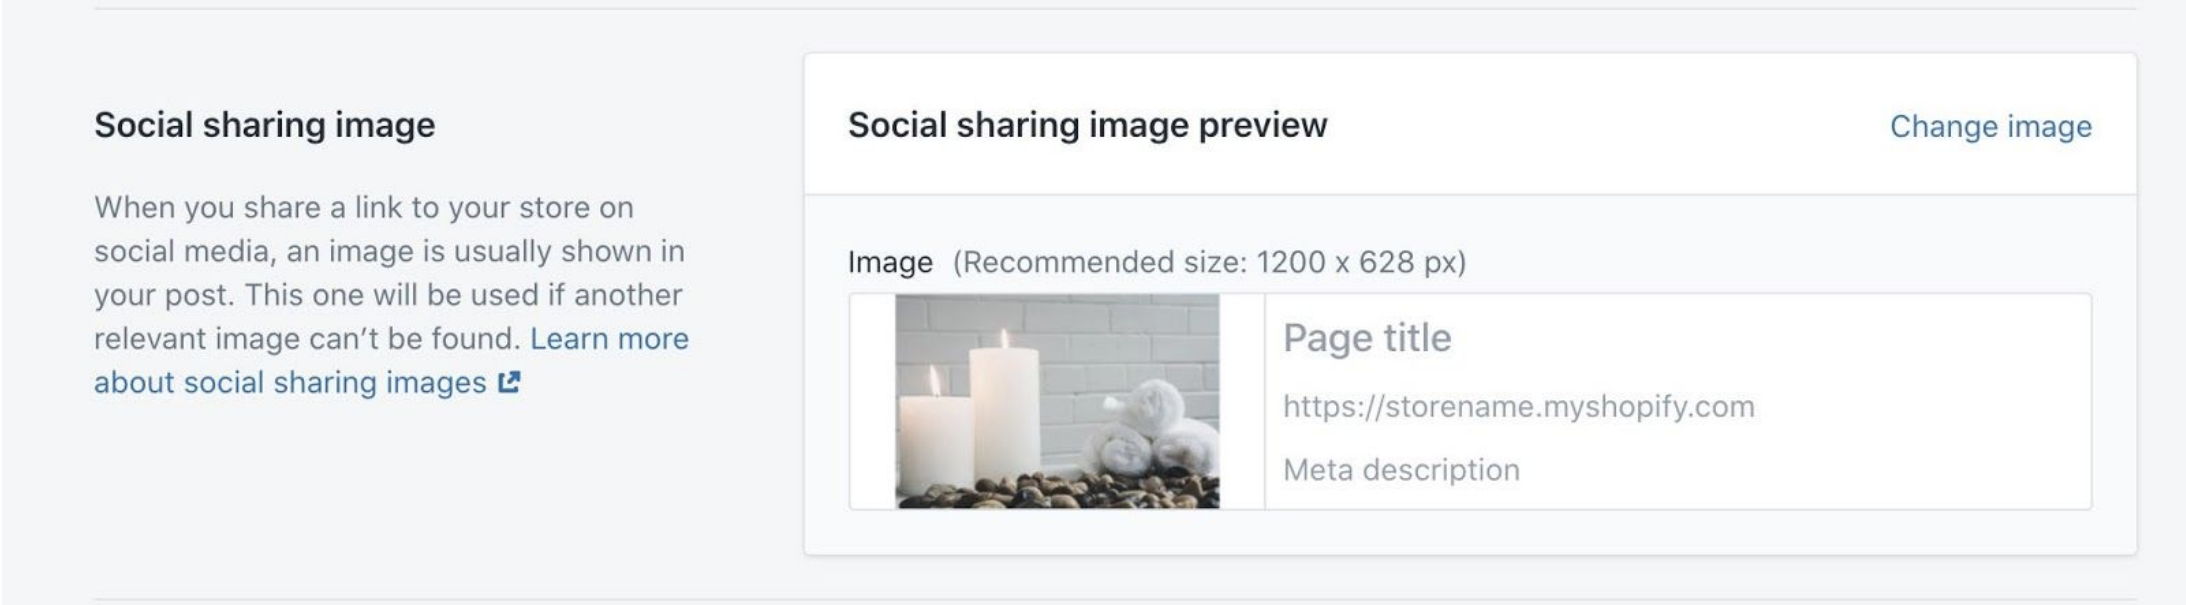 Admin settings showing a preview of an image shared on social media